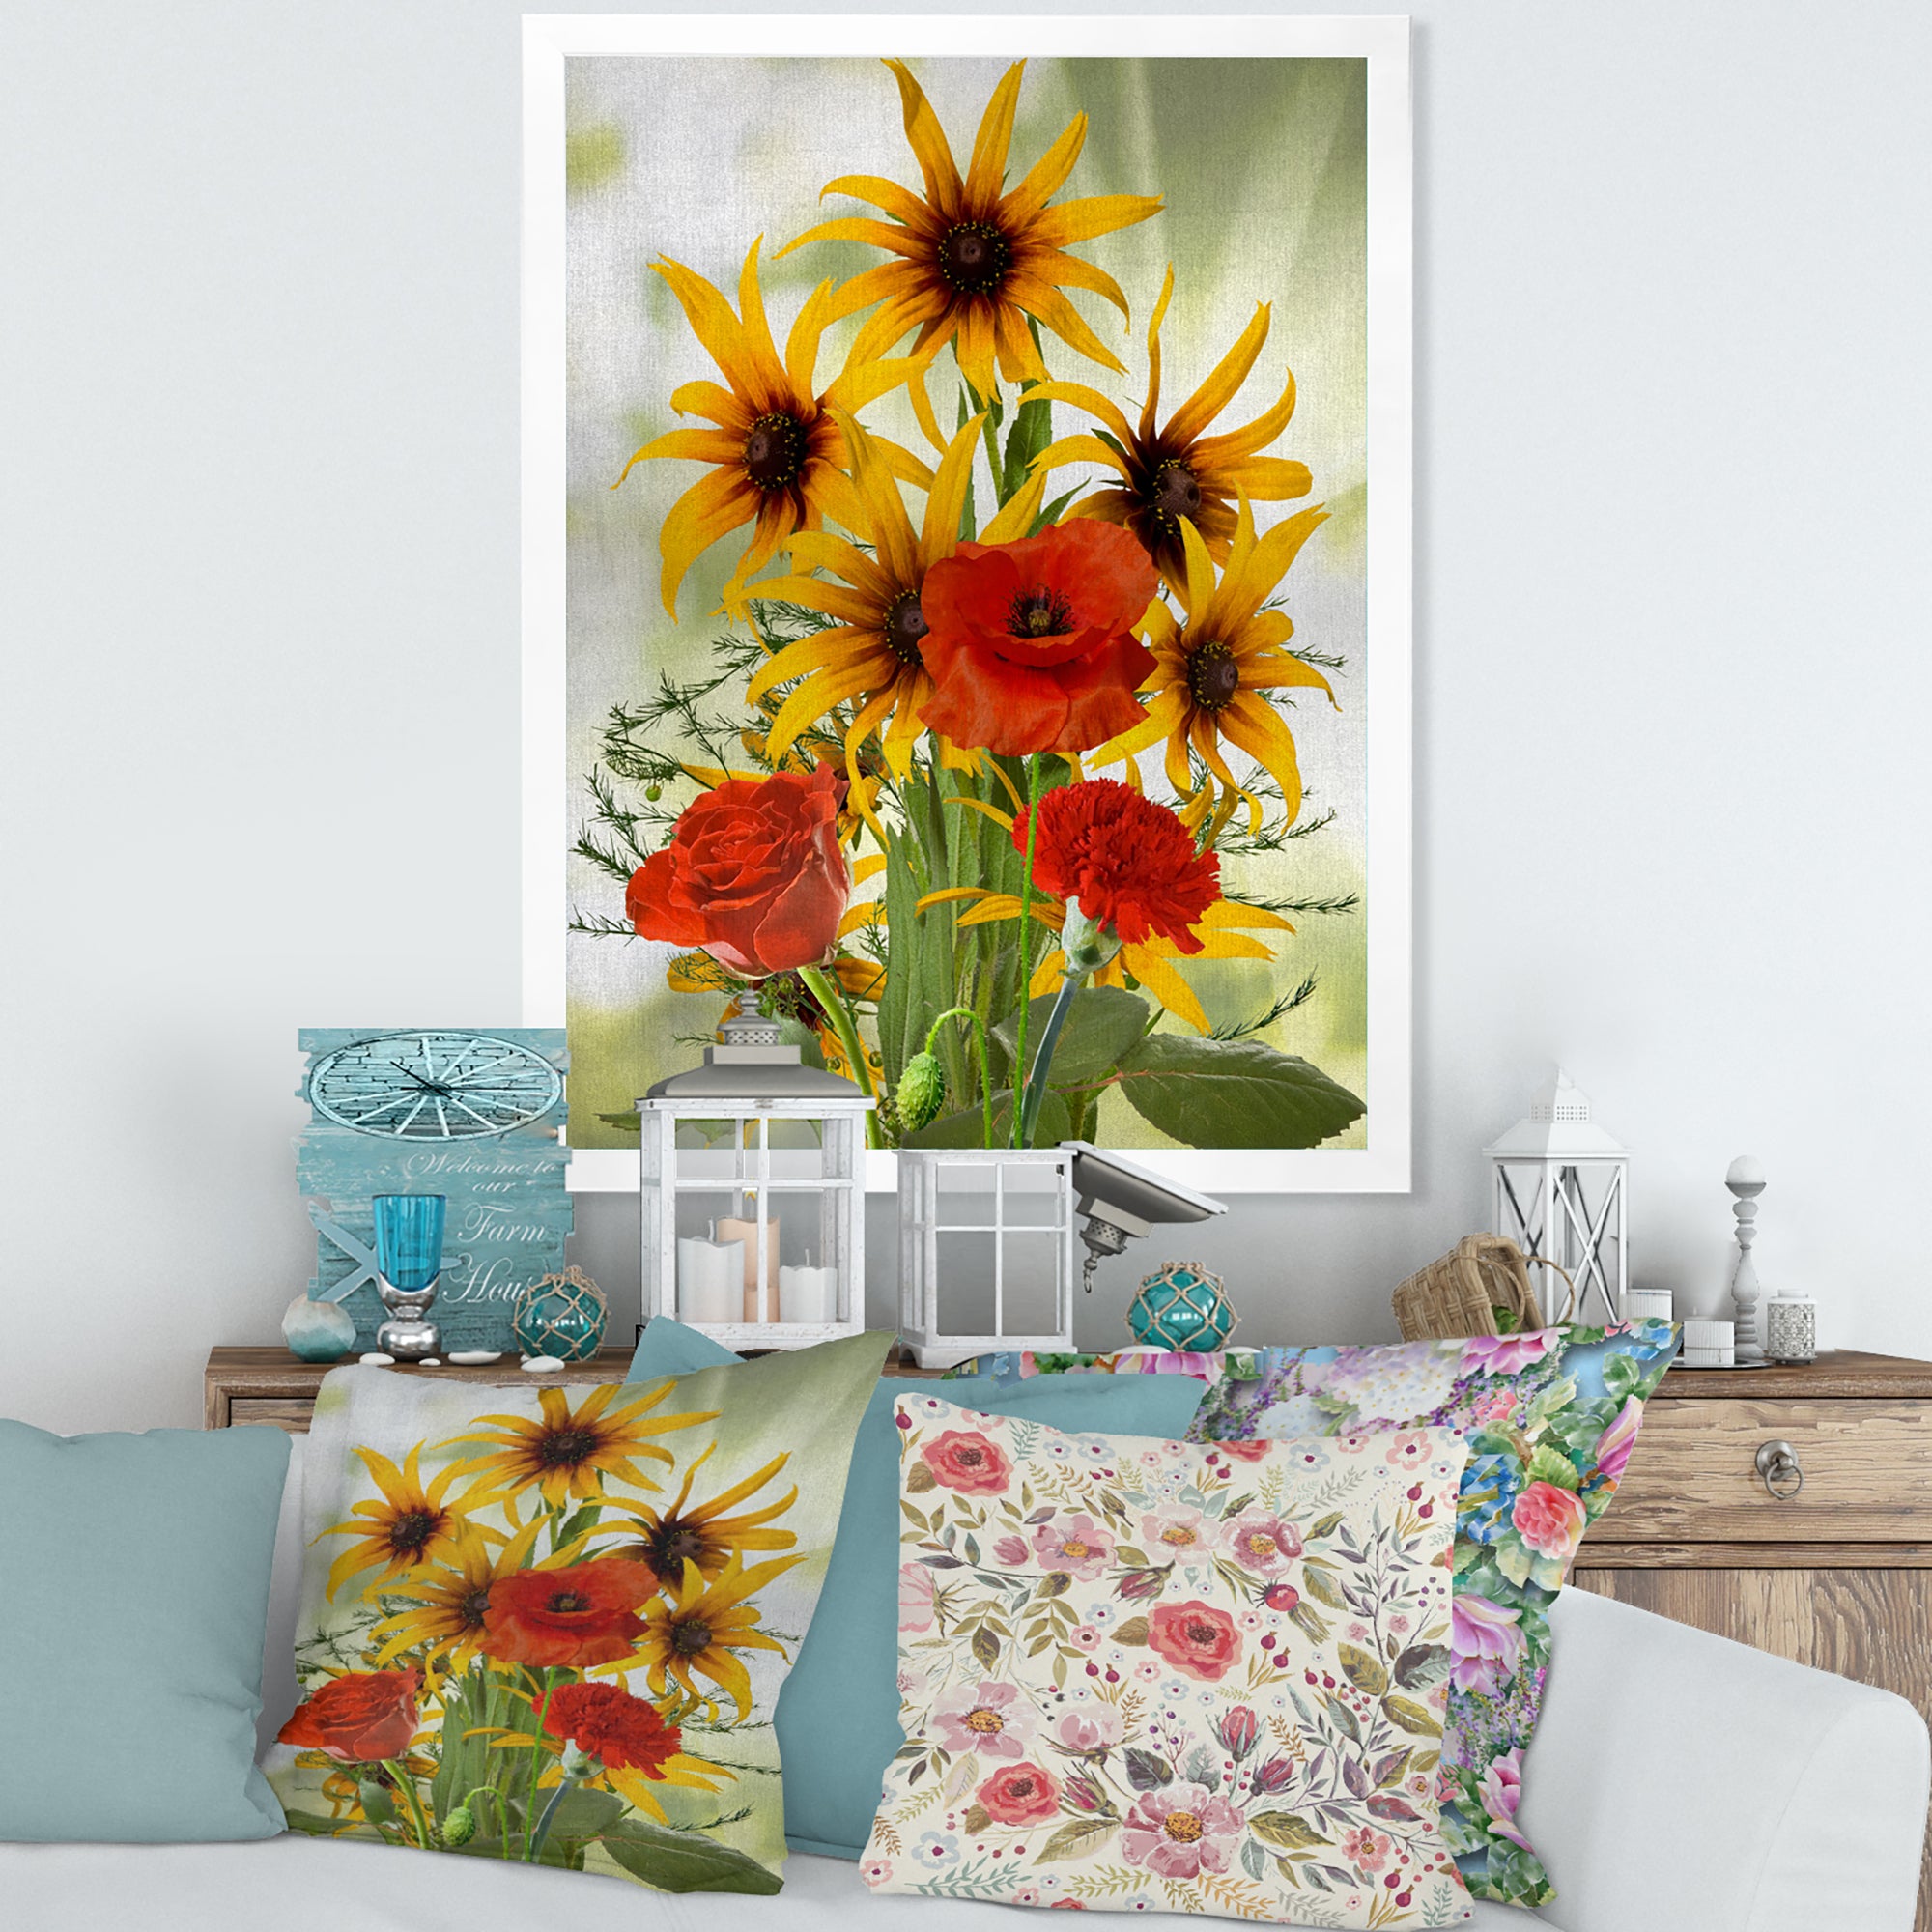 Sunflowers and Poppies In The Wild